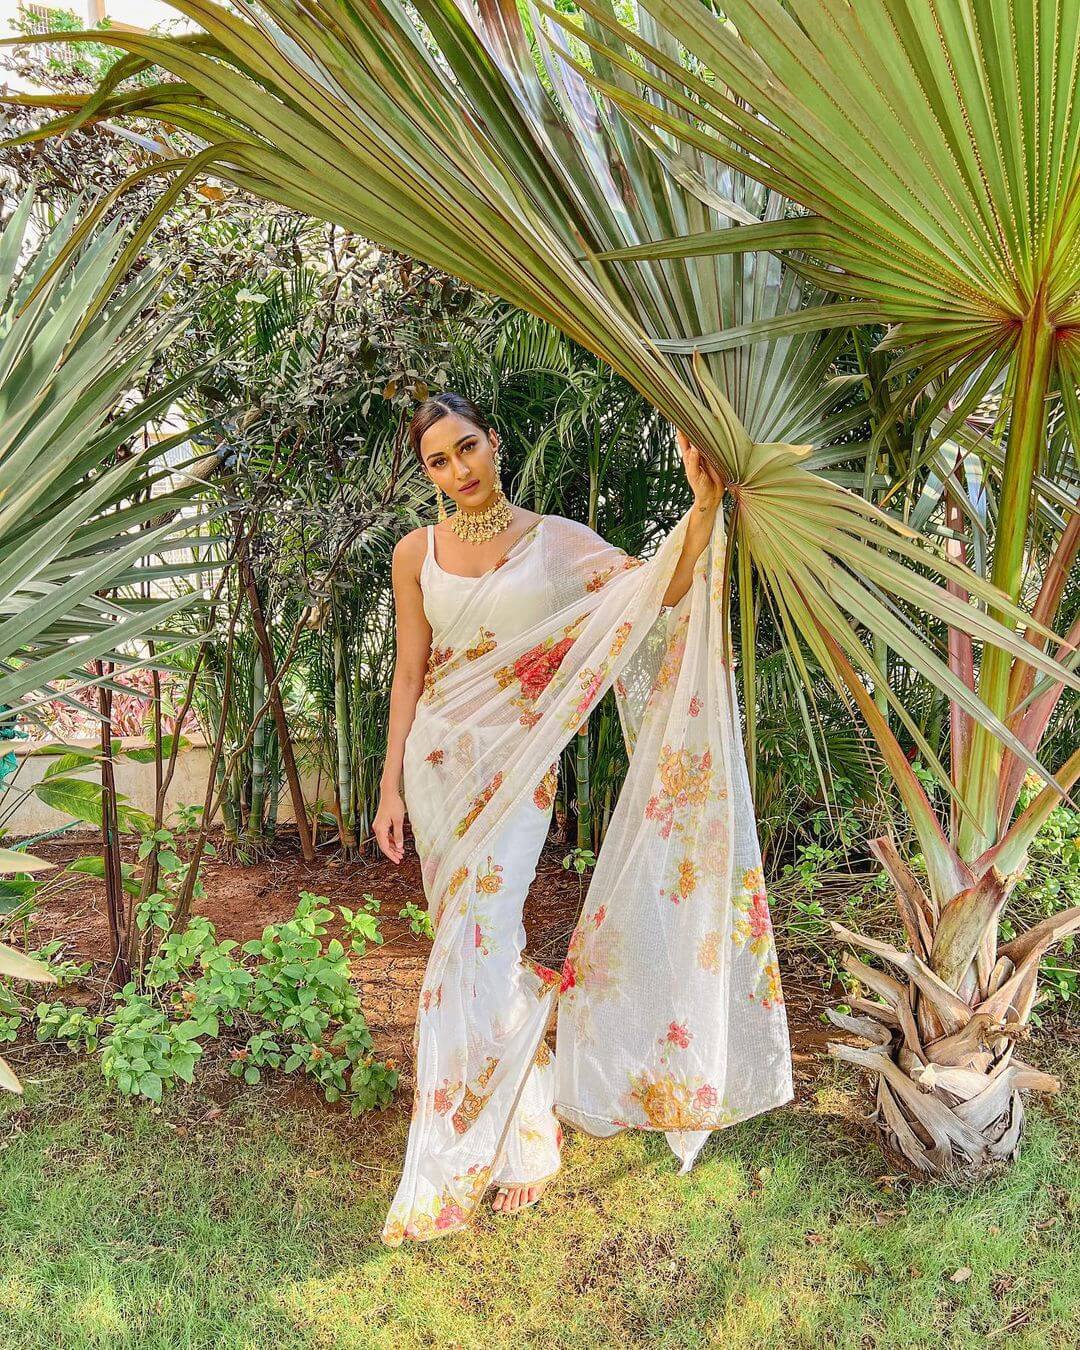 Erica Look Elegant In White Organza Saree Outfit